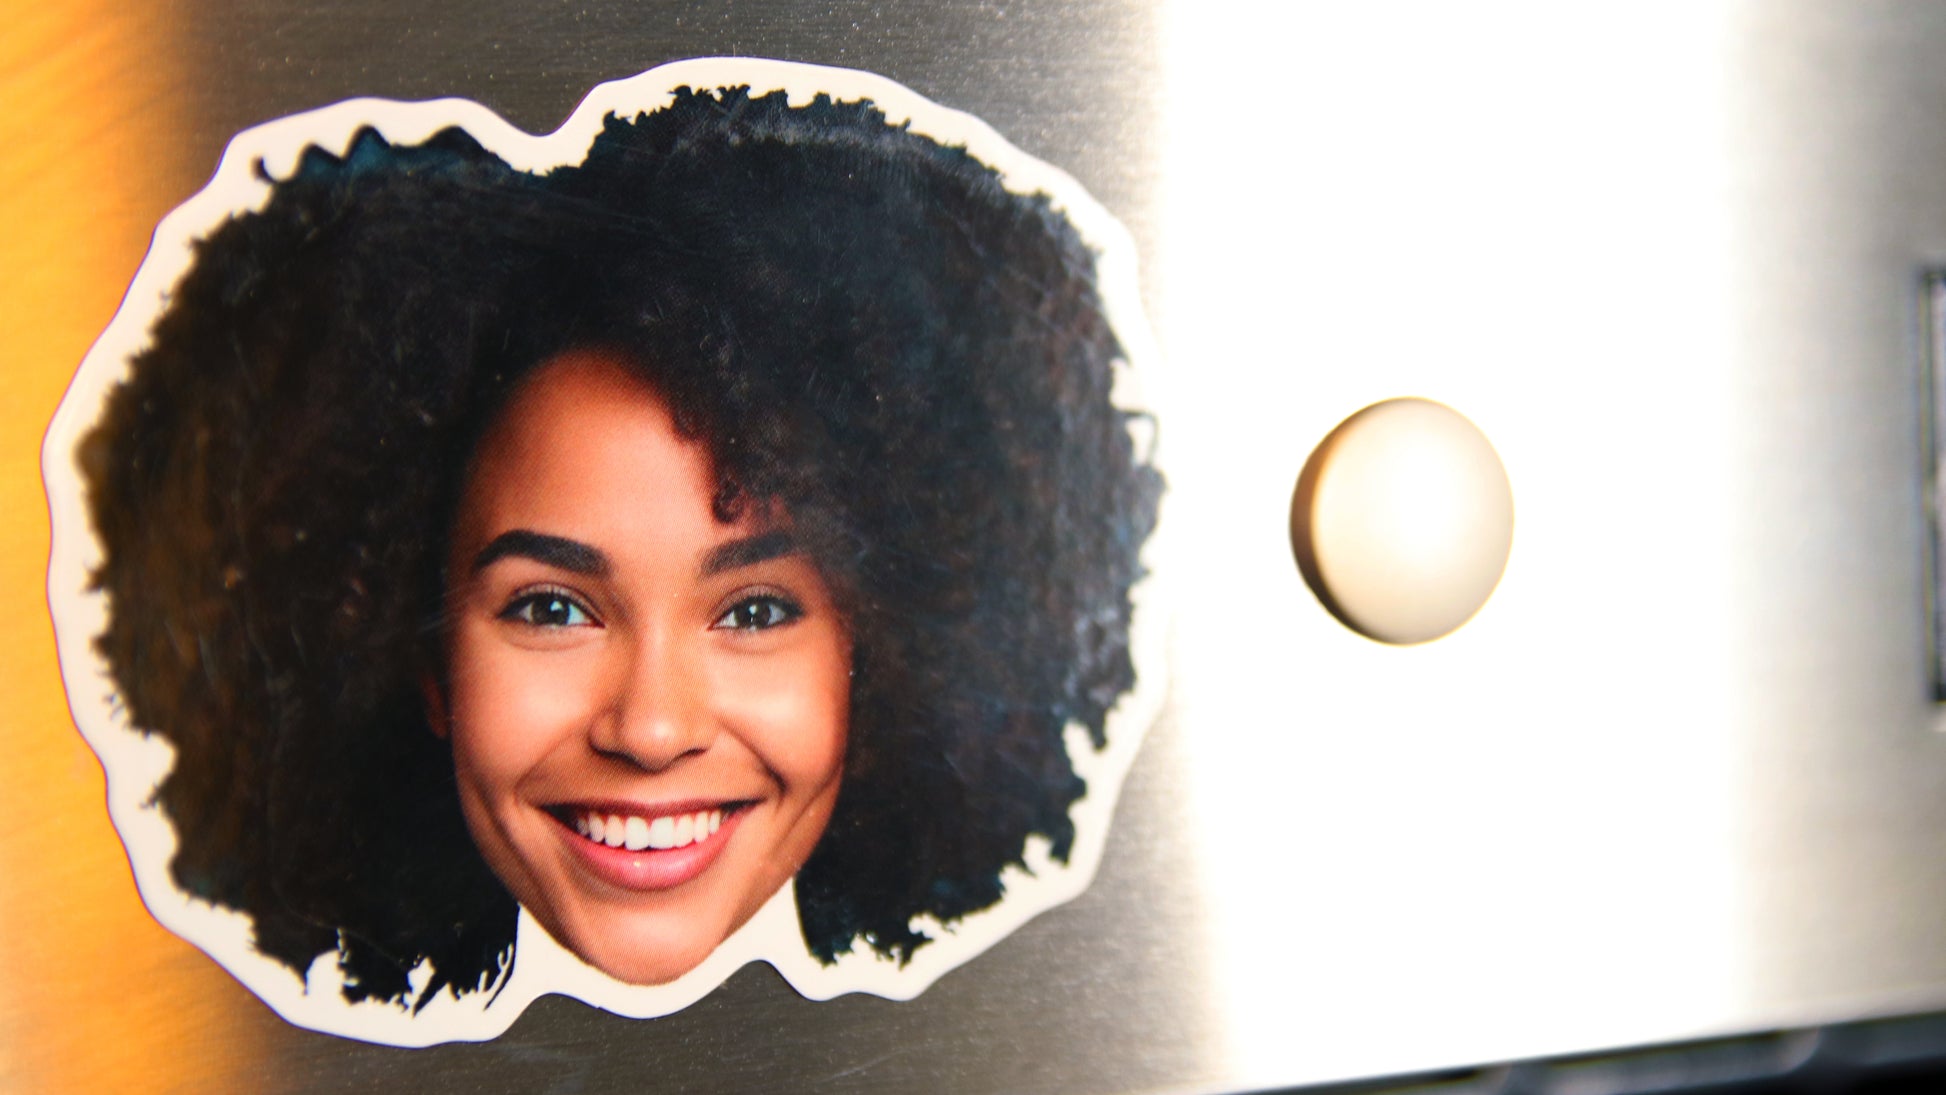 Die cut face magnet with happy woman printed on white